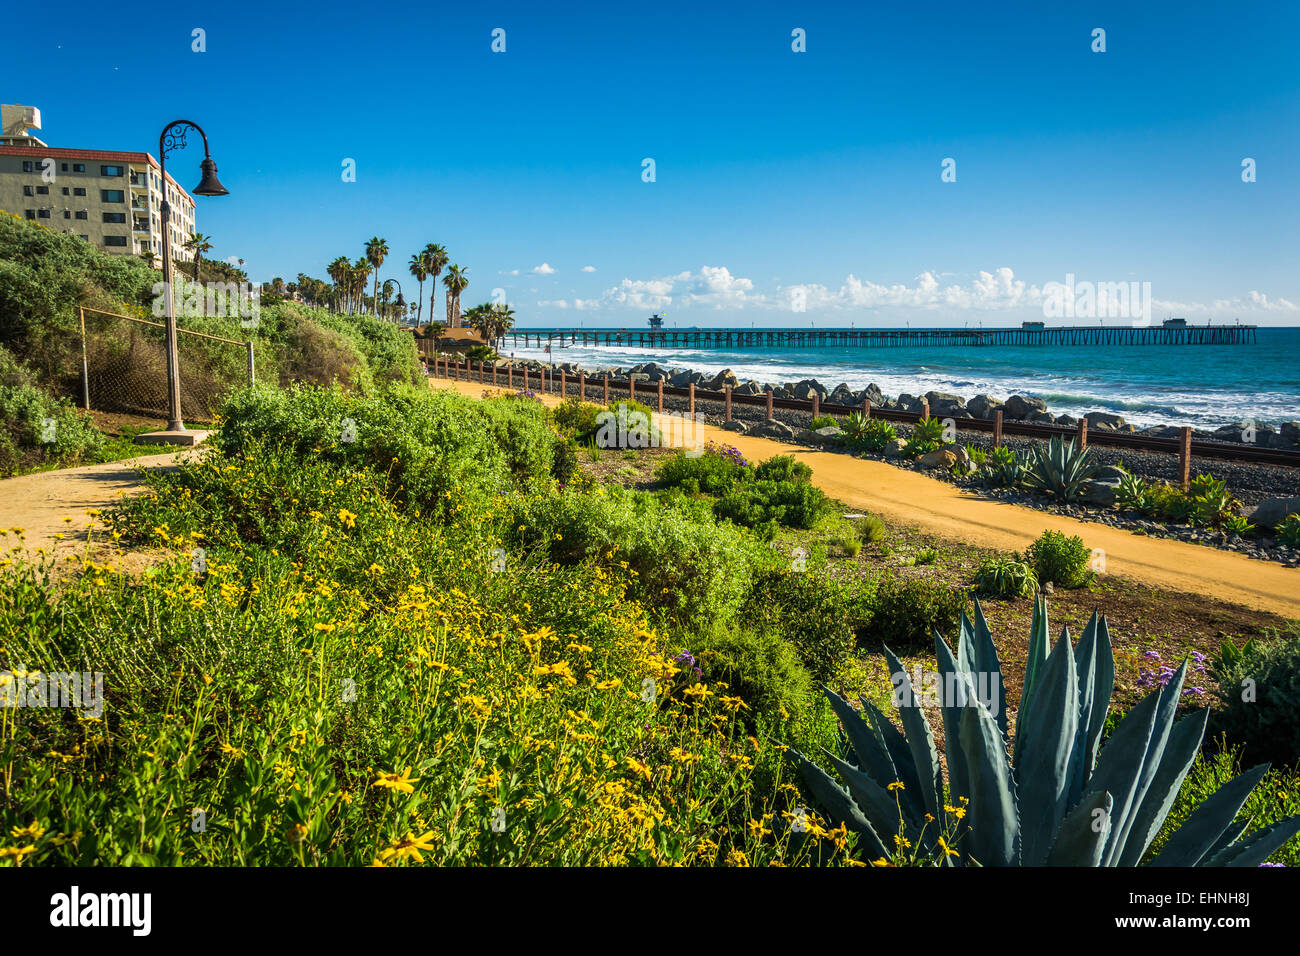 Colorful flowers and view of the fishing pier at Linda Lane Park, in San Clemente, California. Stock Photo